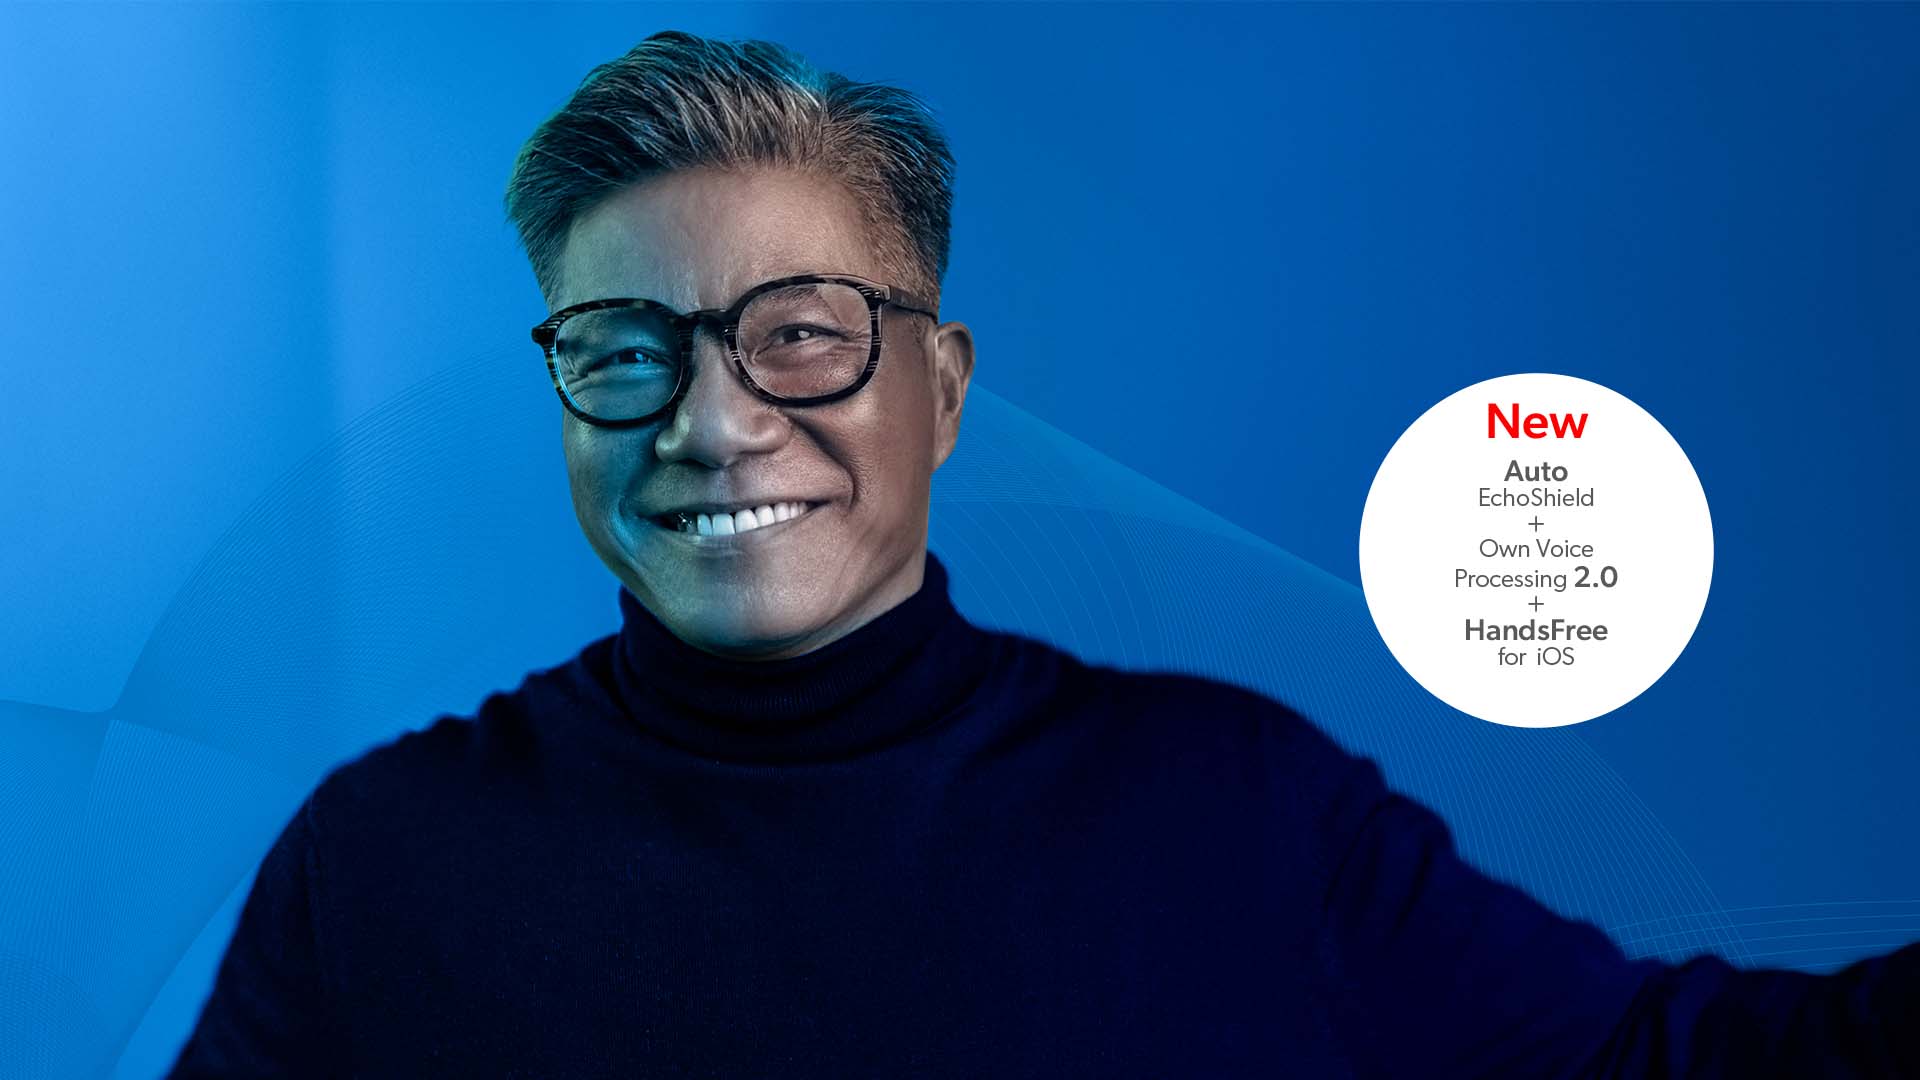 Man smiling and wearing Pure Charge&Go AX hearing aids - new Signia AX features